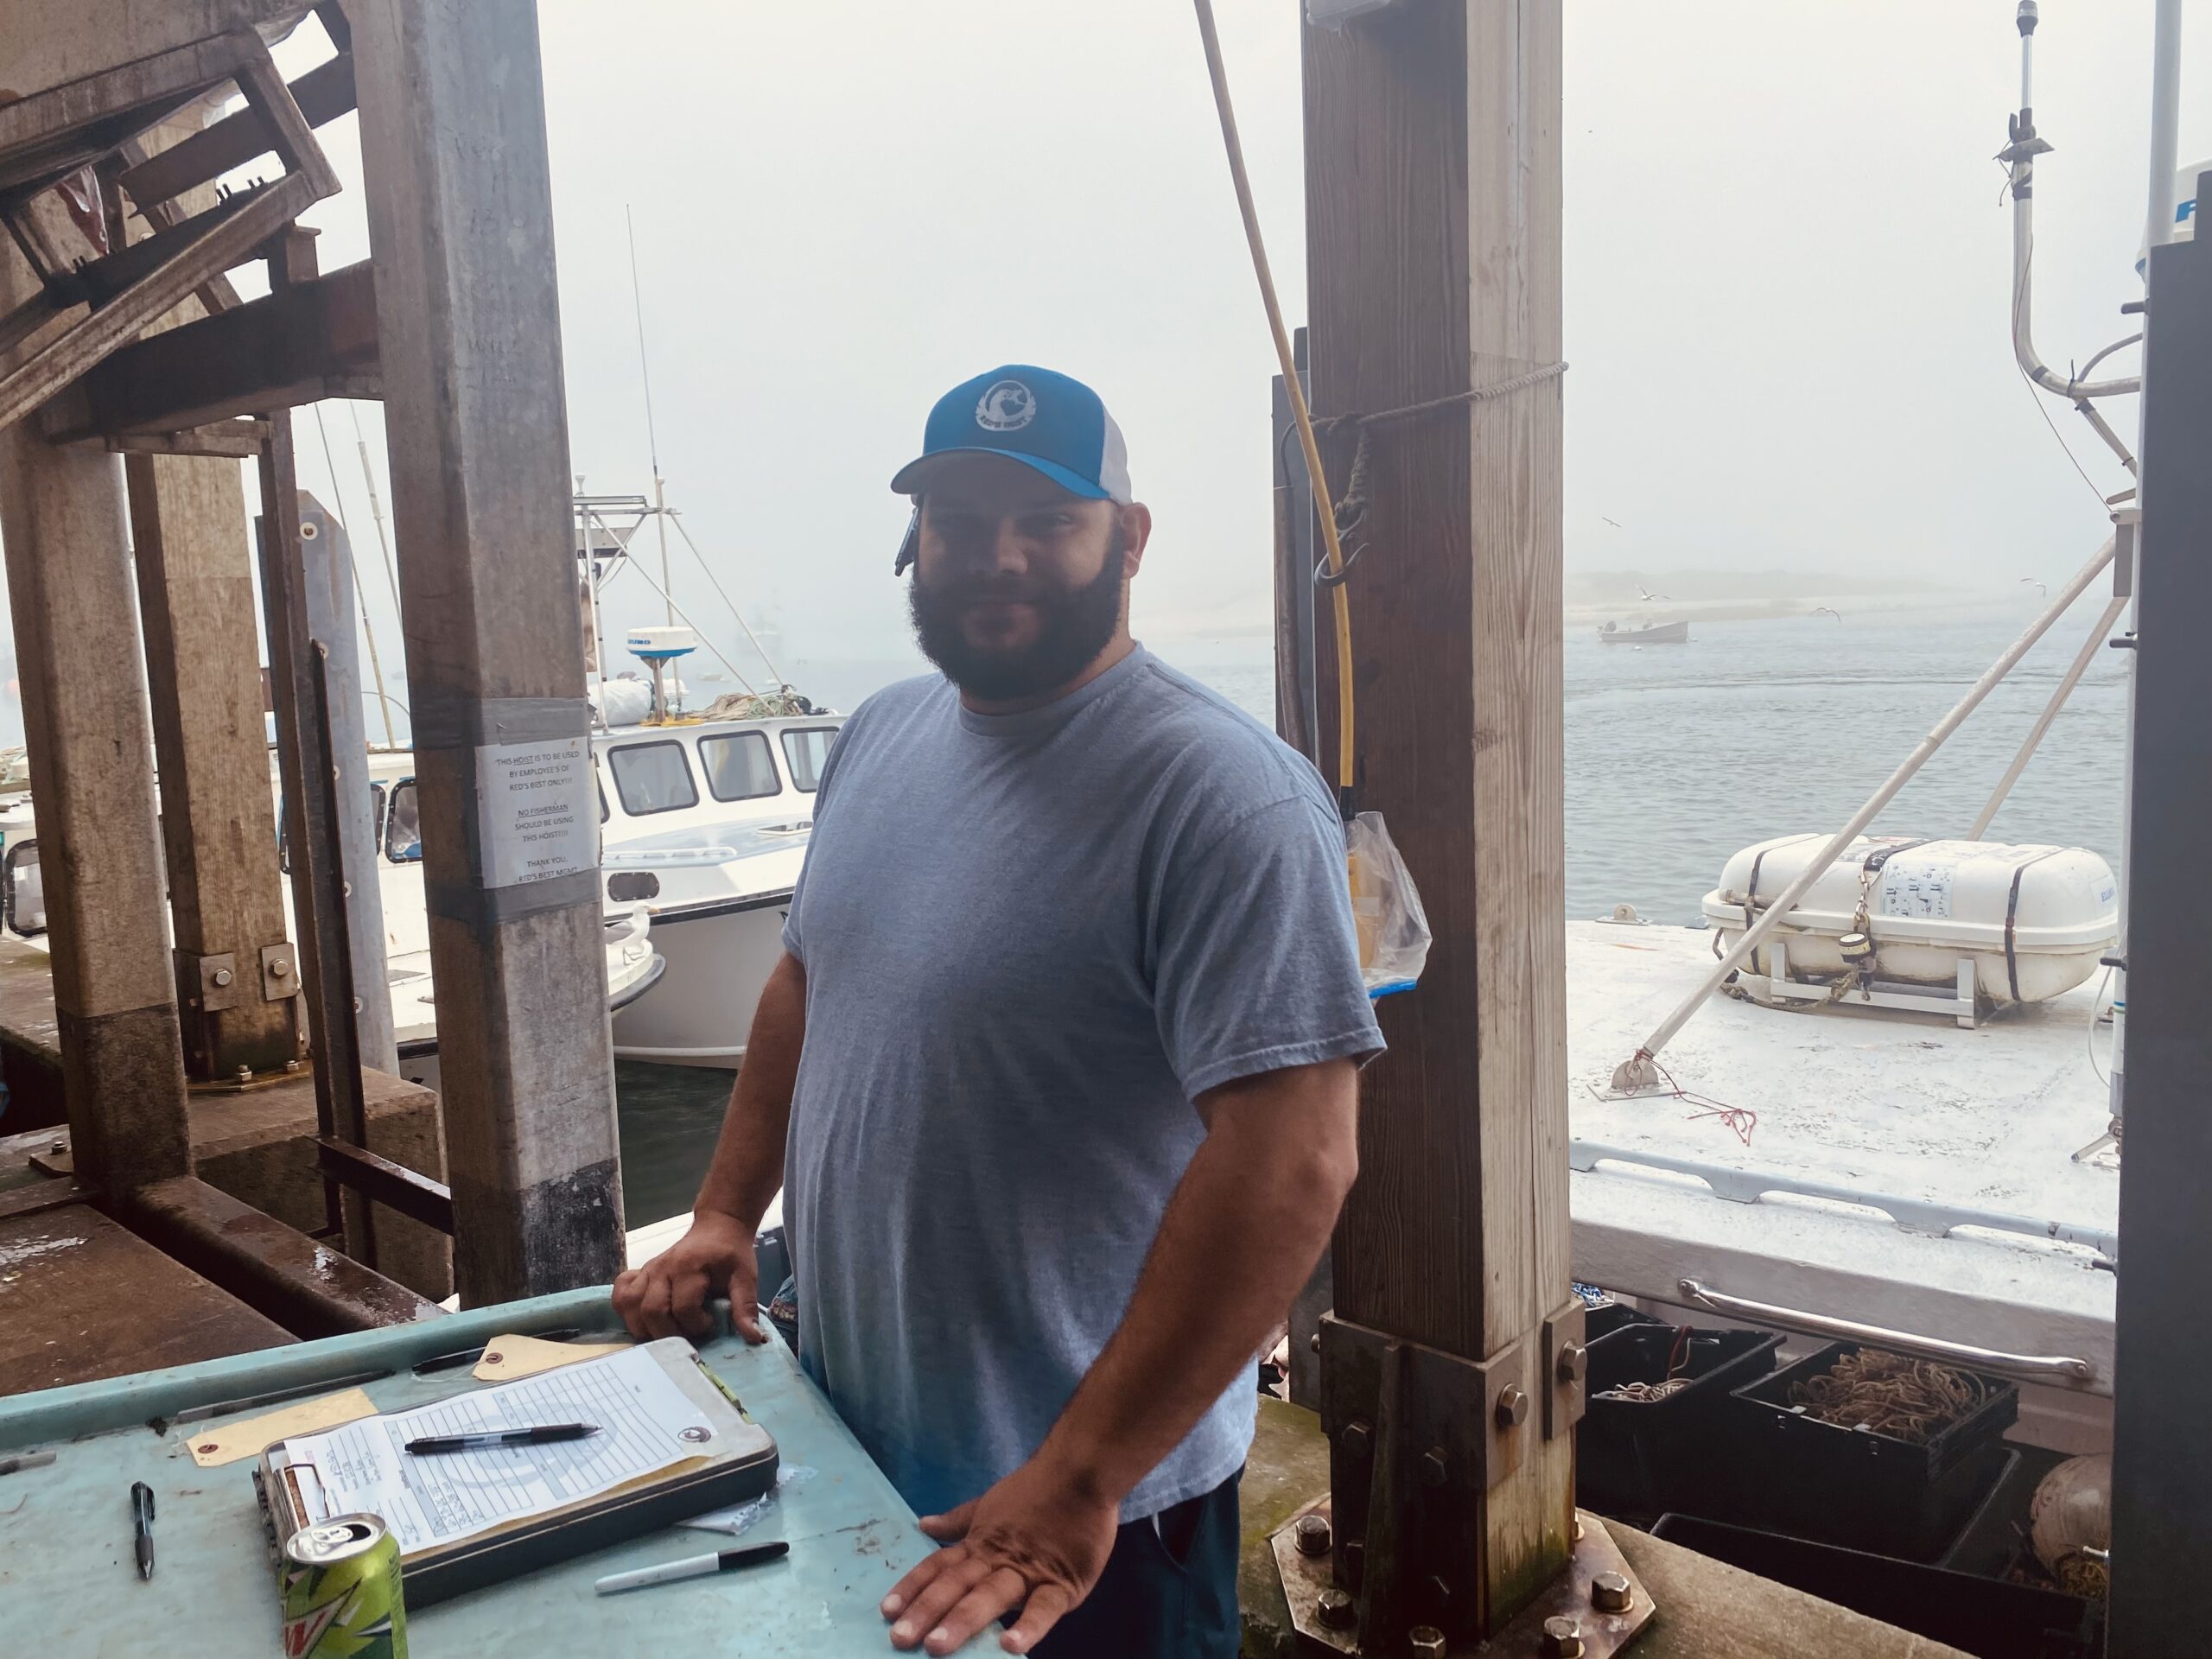 Red’s Best fish pier manager makes summer craze look fun